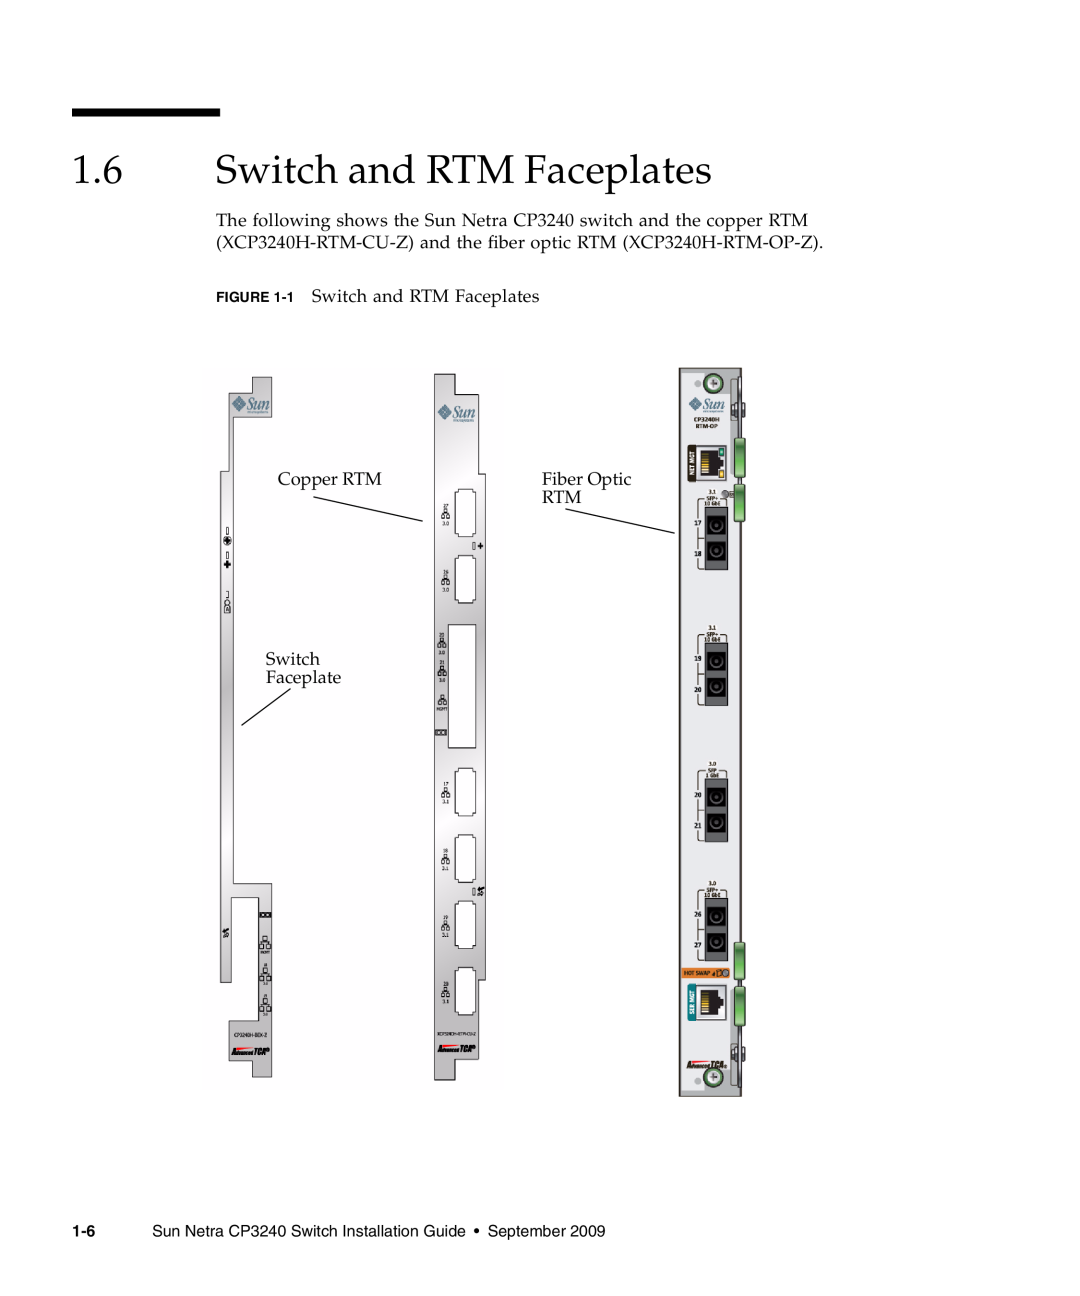 Sun Microsystems CP3240 manual 1 Switch and RTM Faceplates, Copper RTM, Fiber Optic, Switch Faceplate 